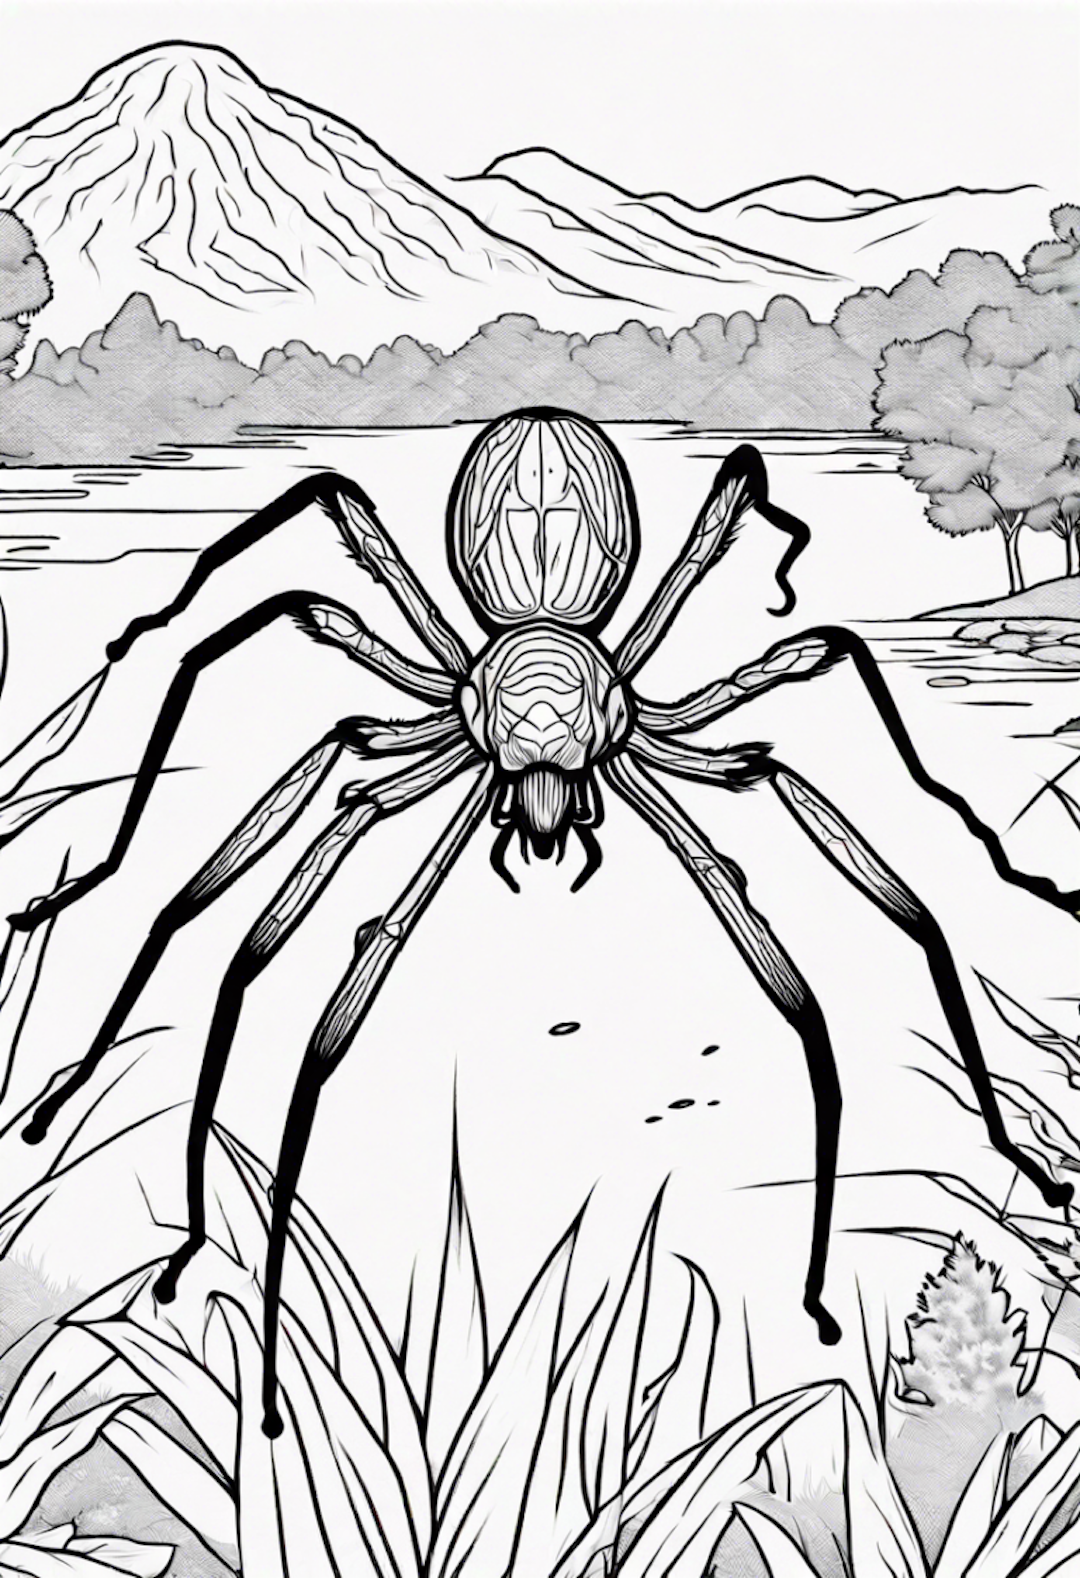 Spider Adventure by the Lake coloring pages